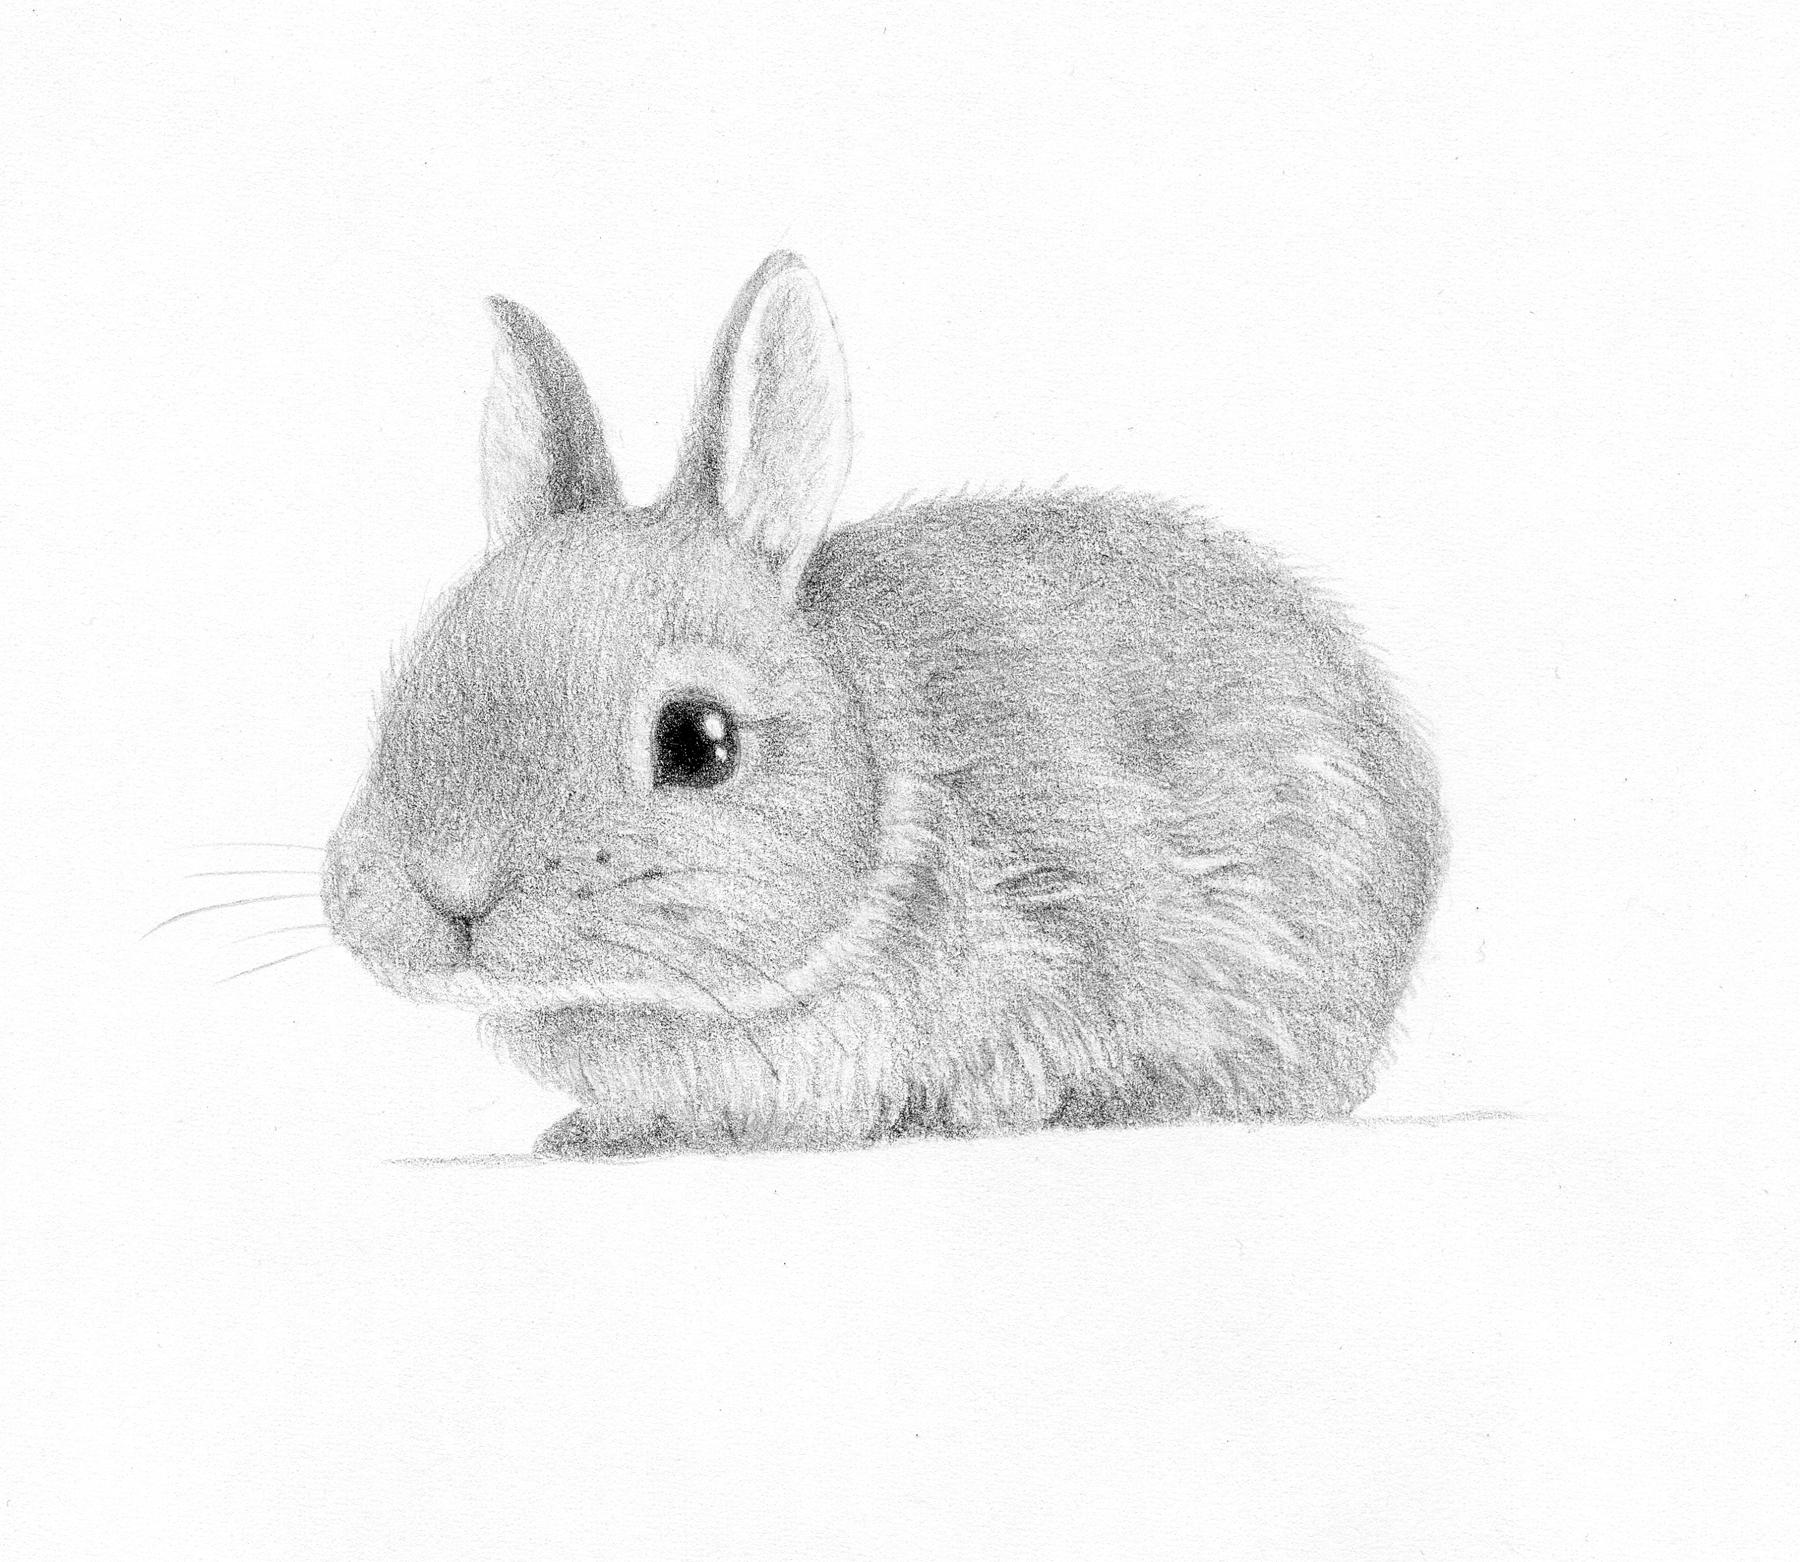 How To Draw A Bunny: The Fast And Easy Way | Caribu